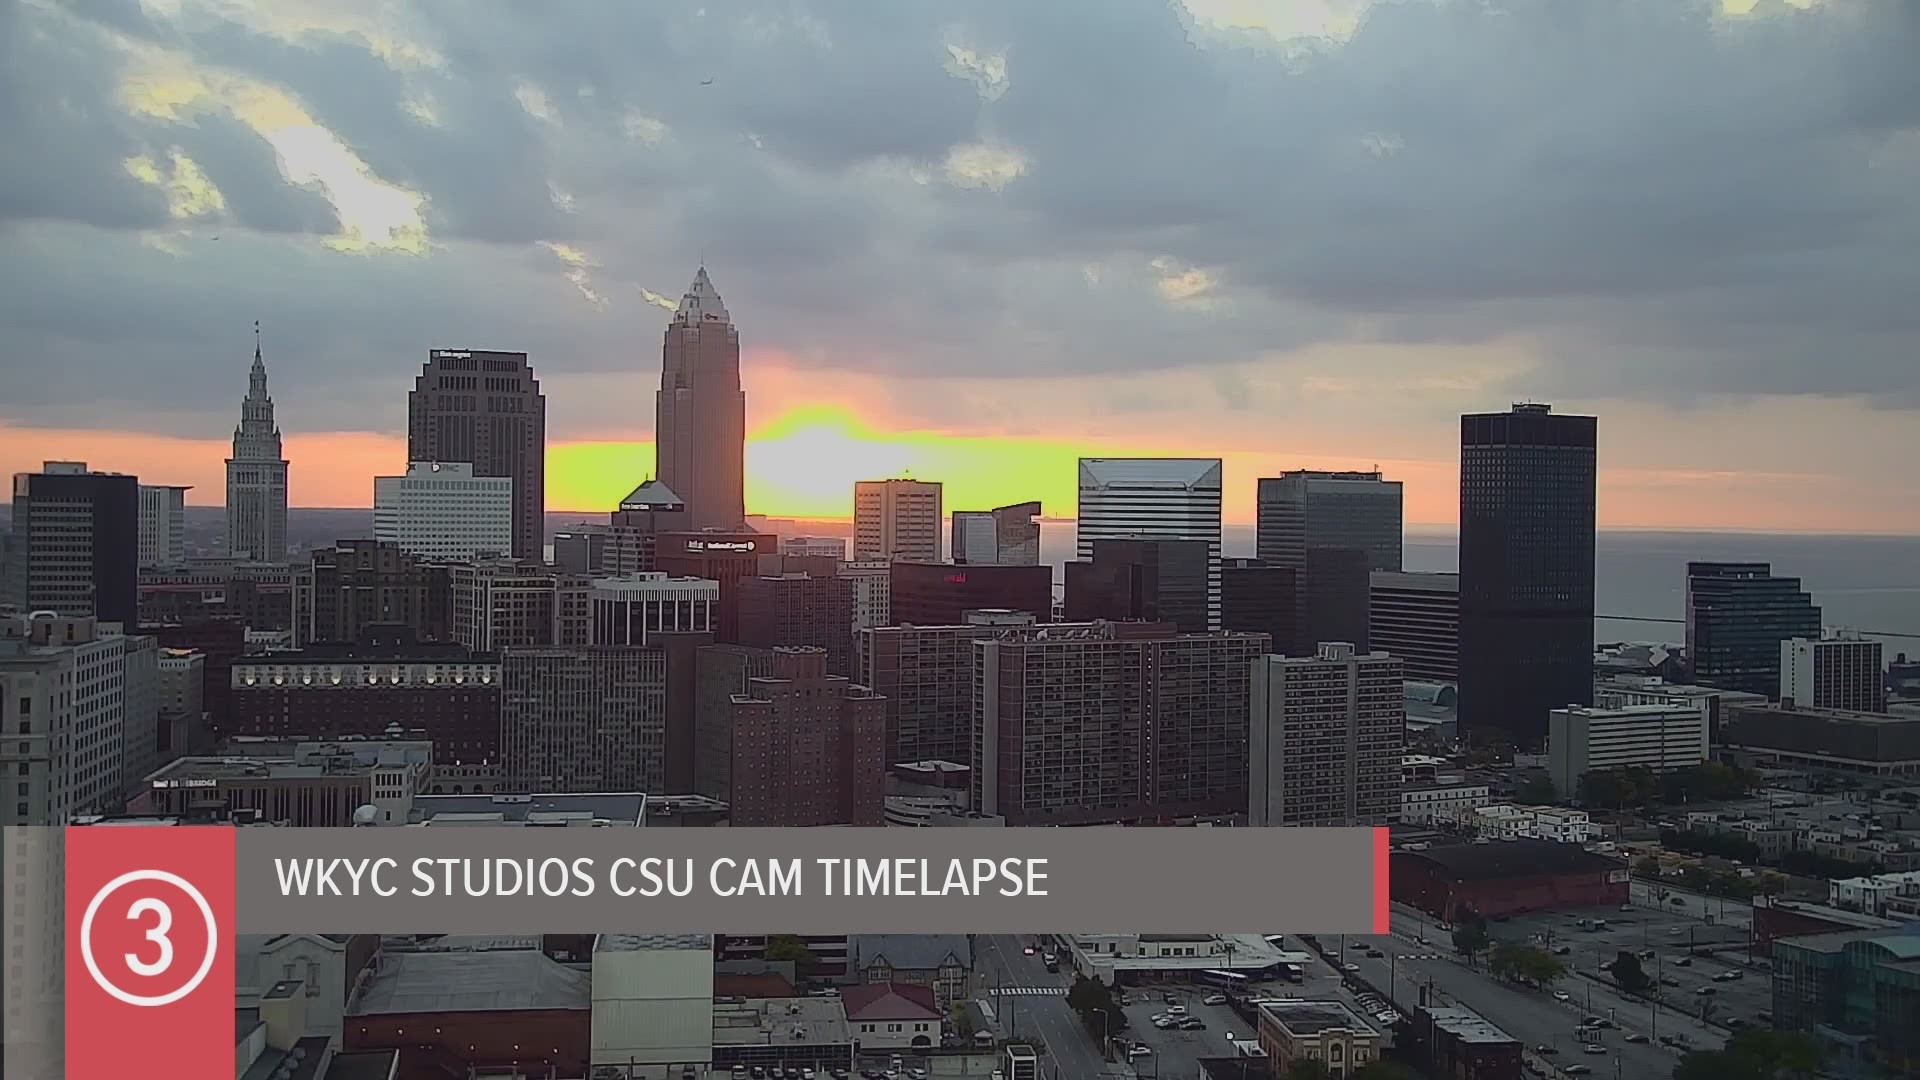 The days are getting shorter. Enjoy the daylight in the evening while it lasts.  Check out tonight's WKYC Studios CSU Cam time-lapse. #3weather